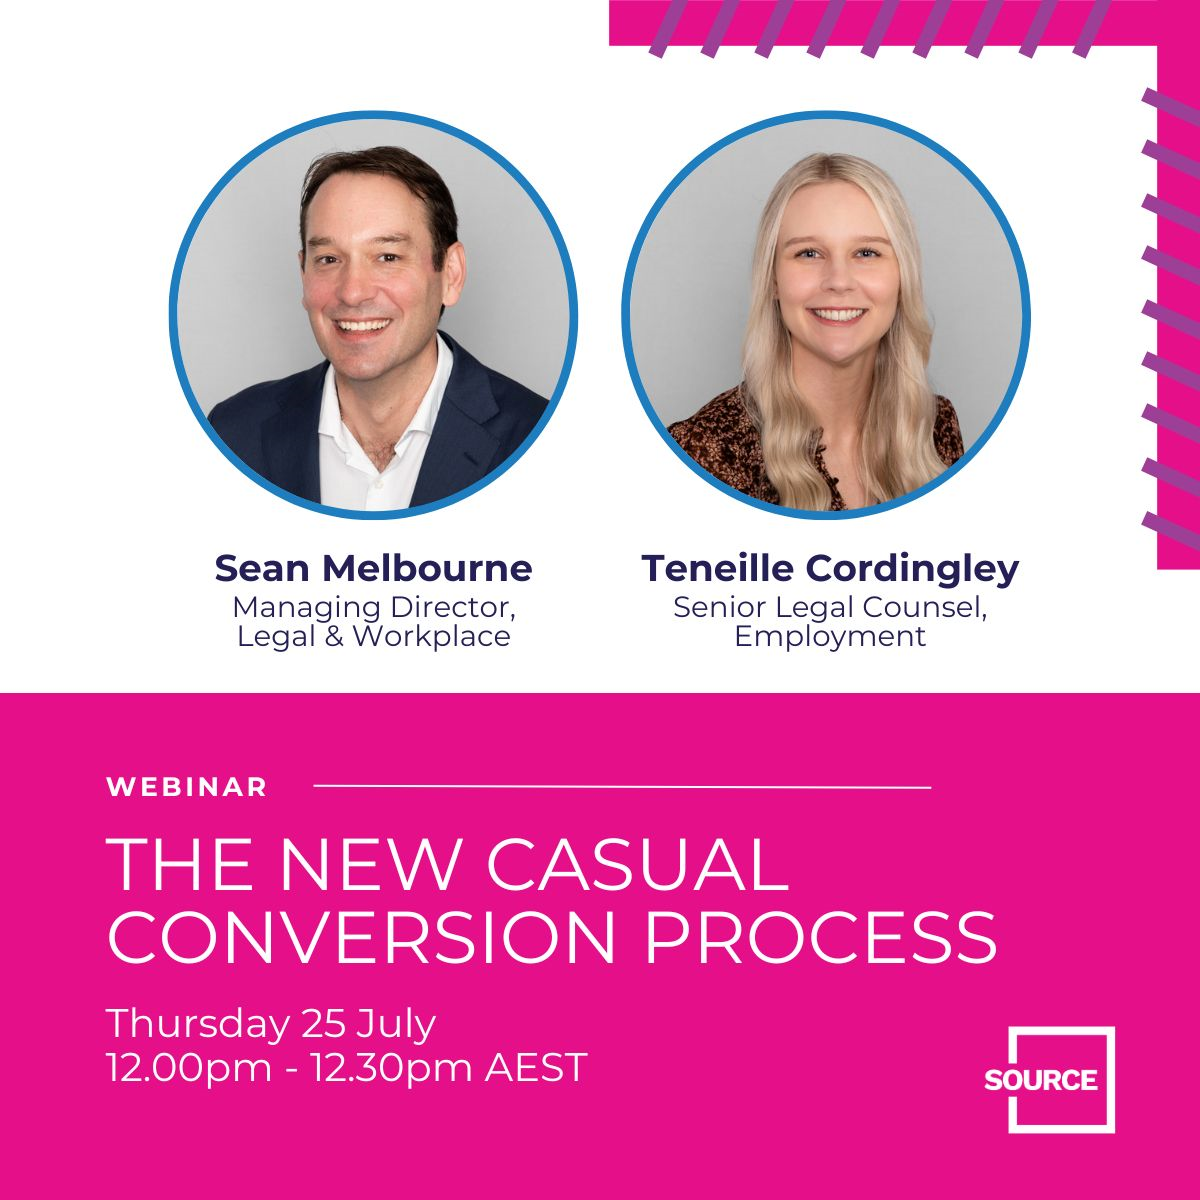 The new casual conversion process